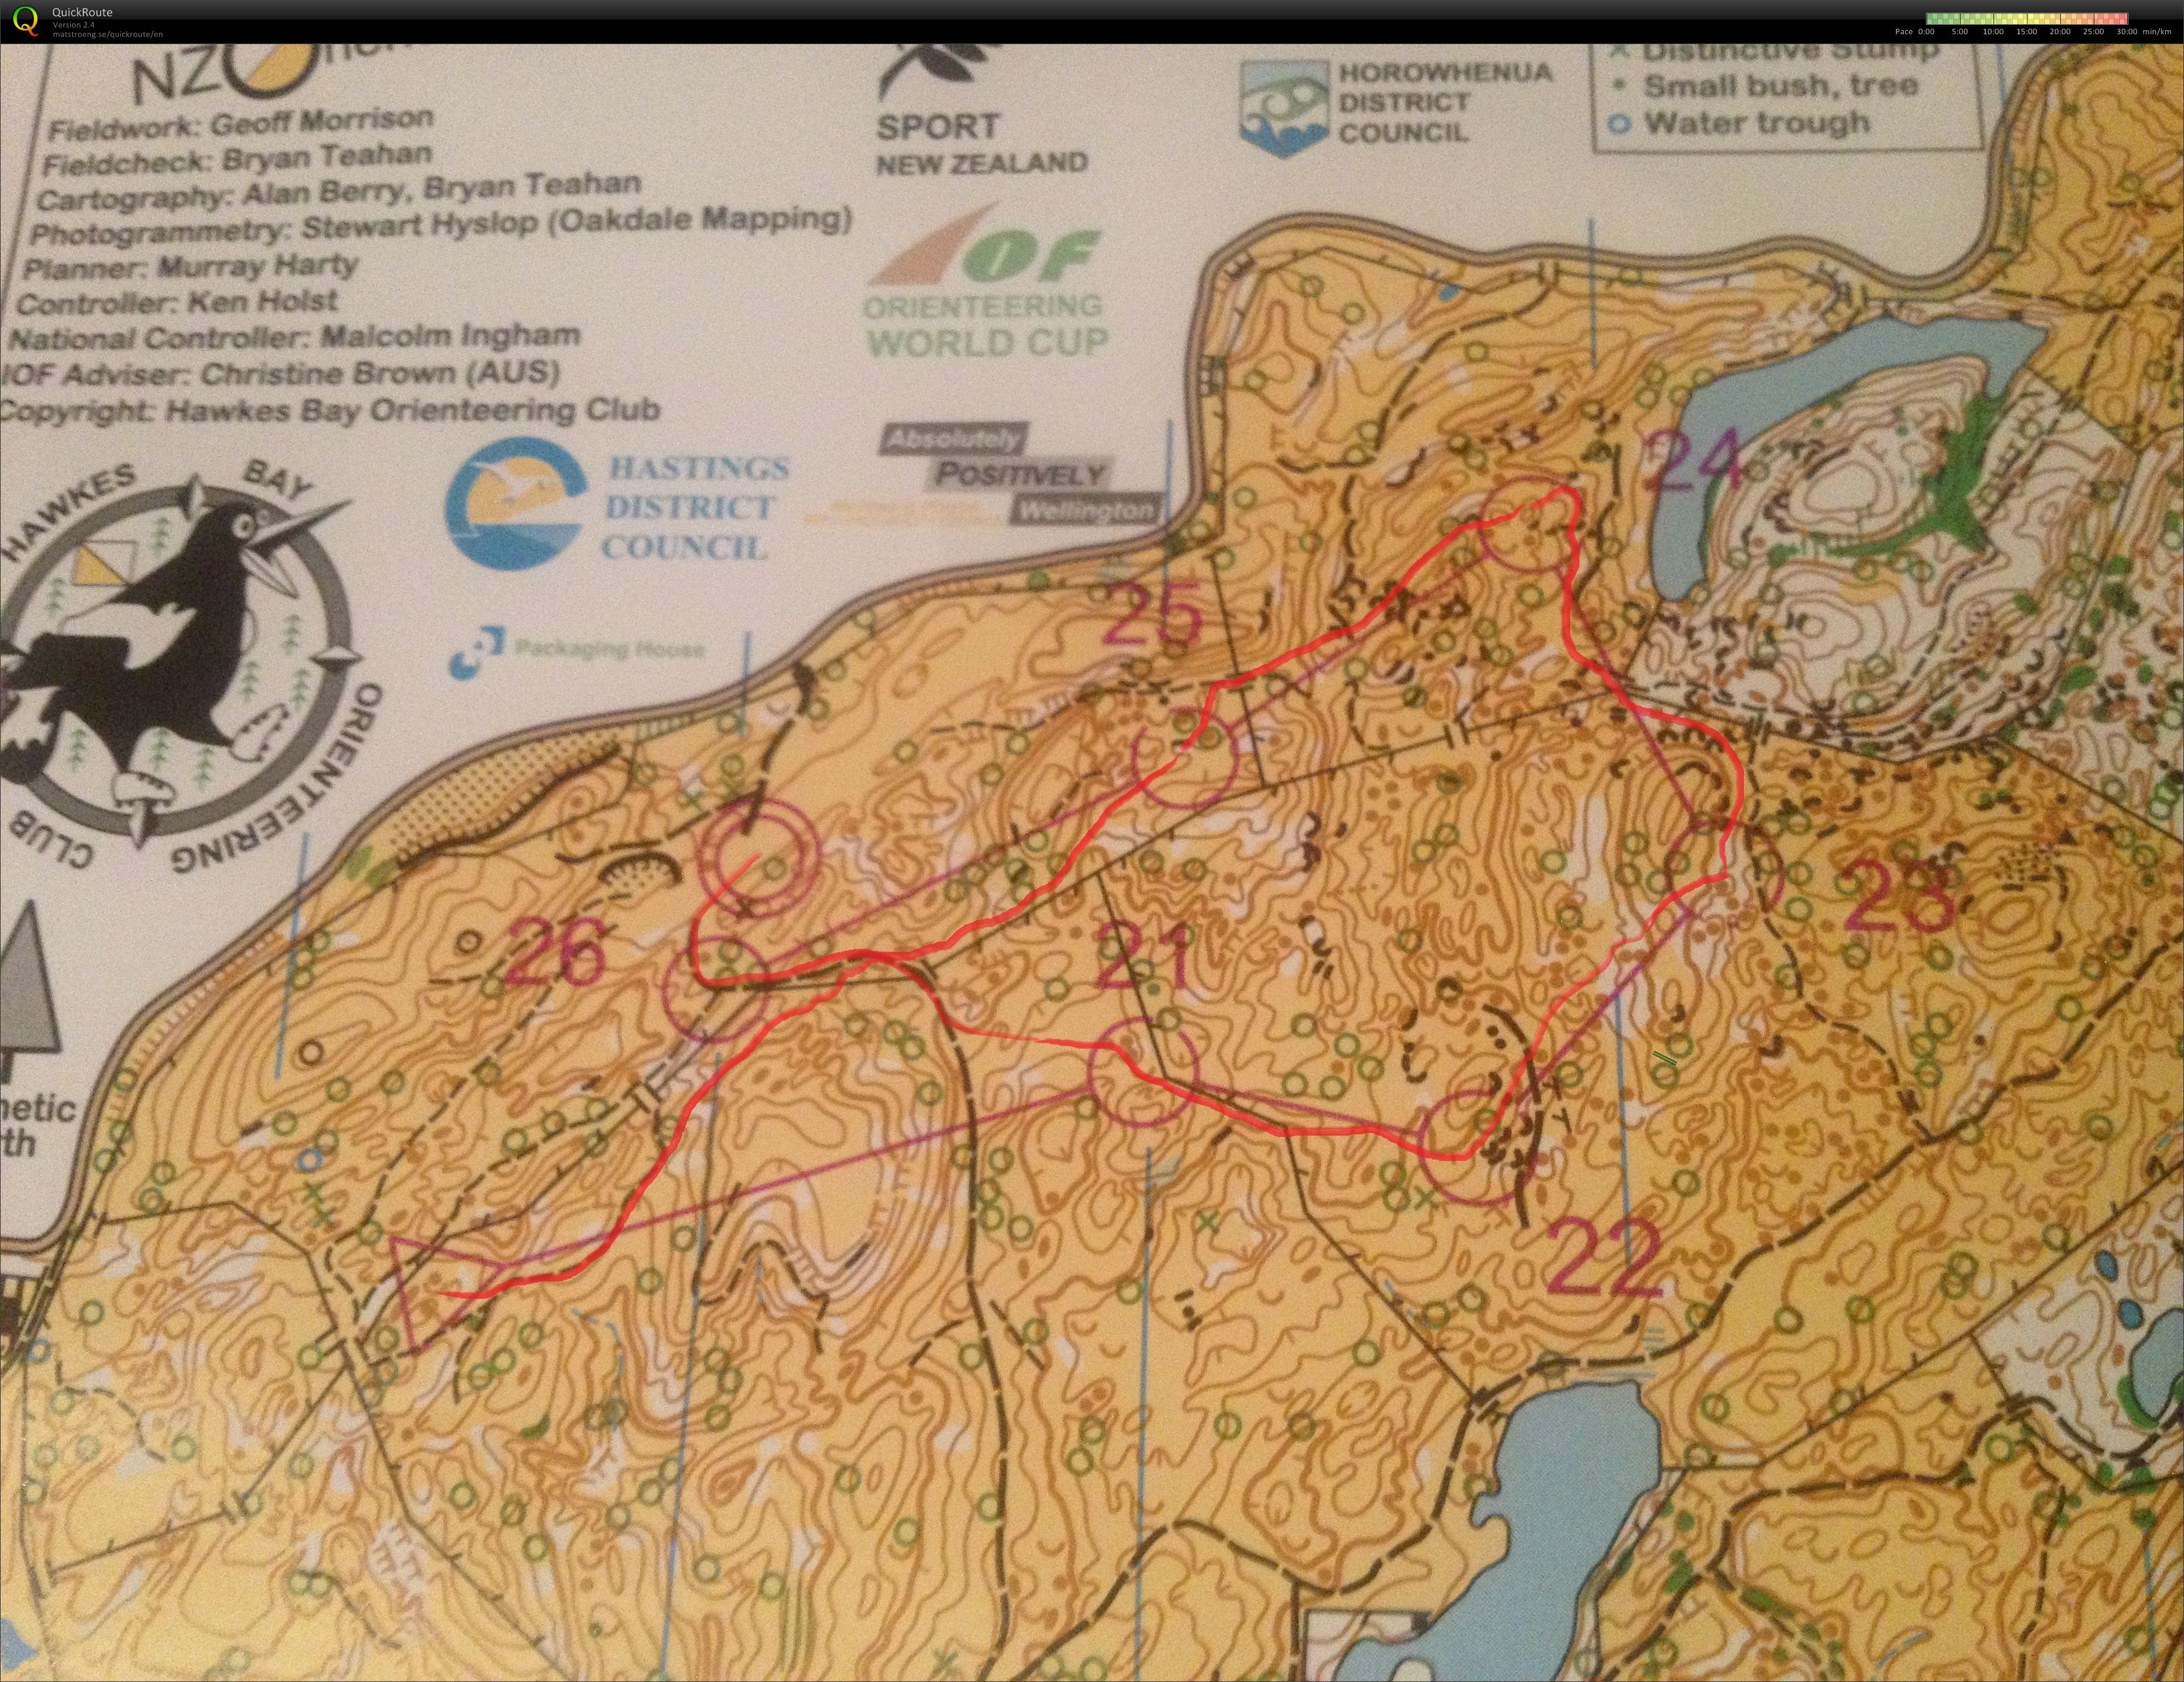 2013 World Cup 3 Chasing Start Map 2 (13.01.2013)